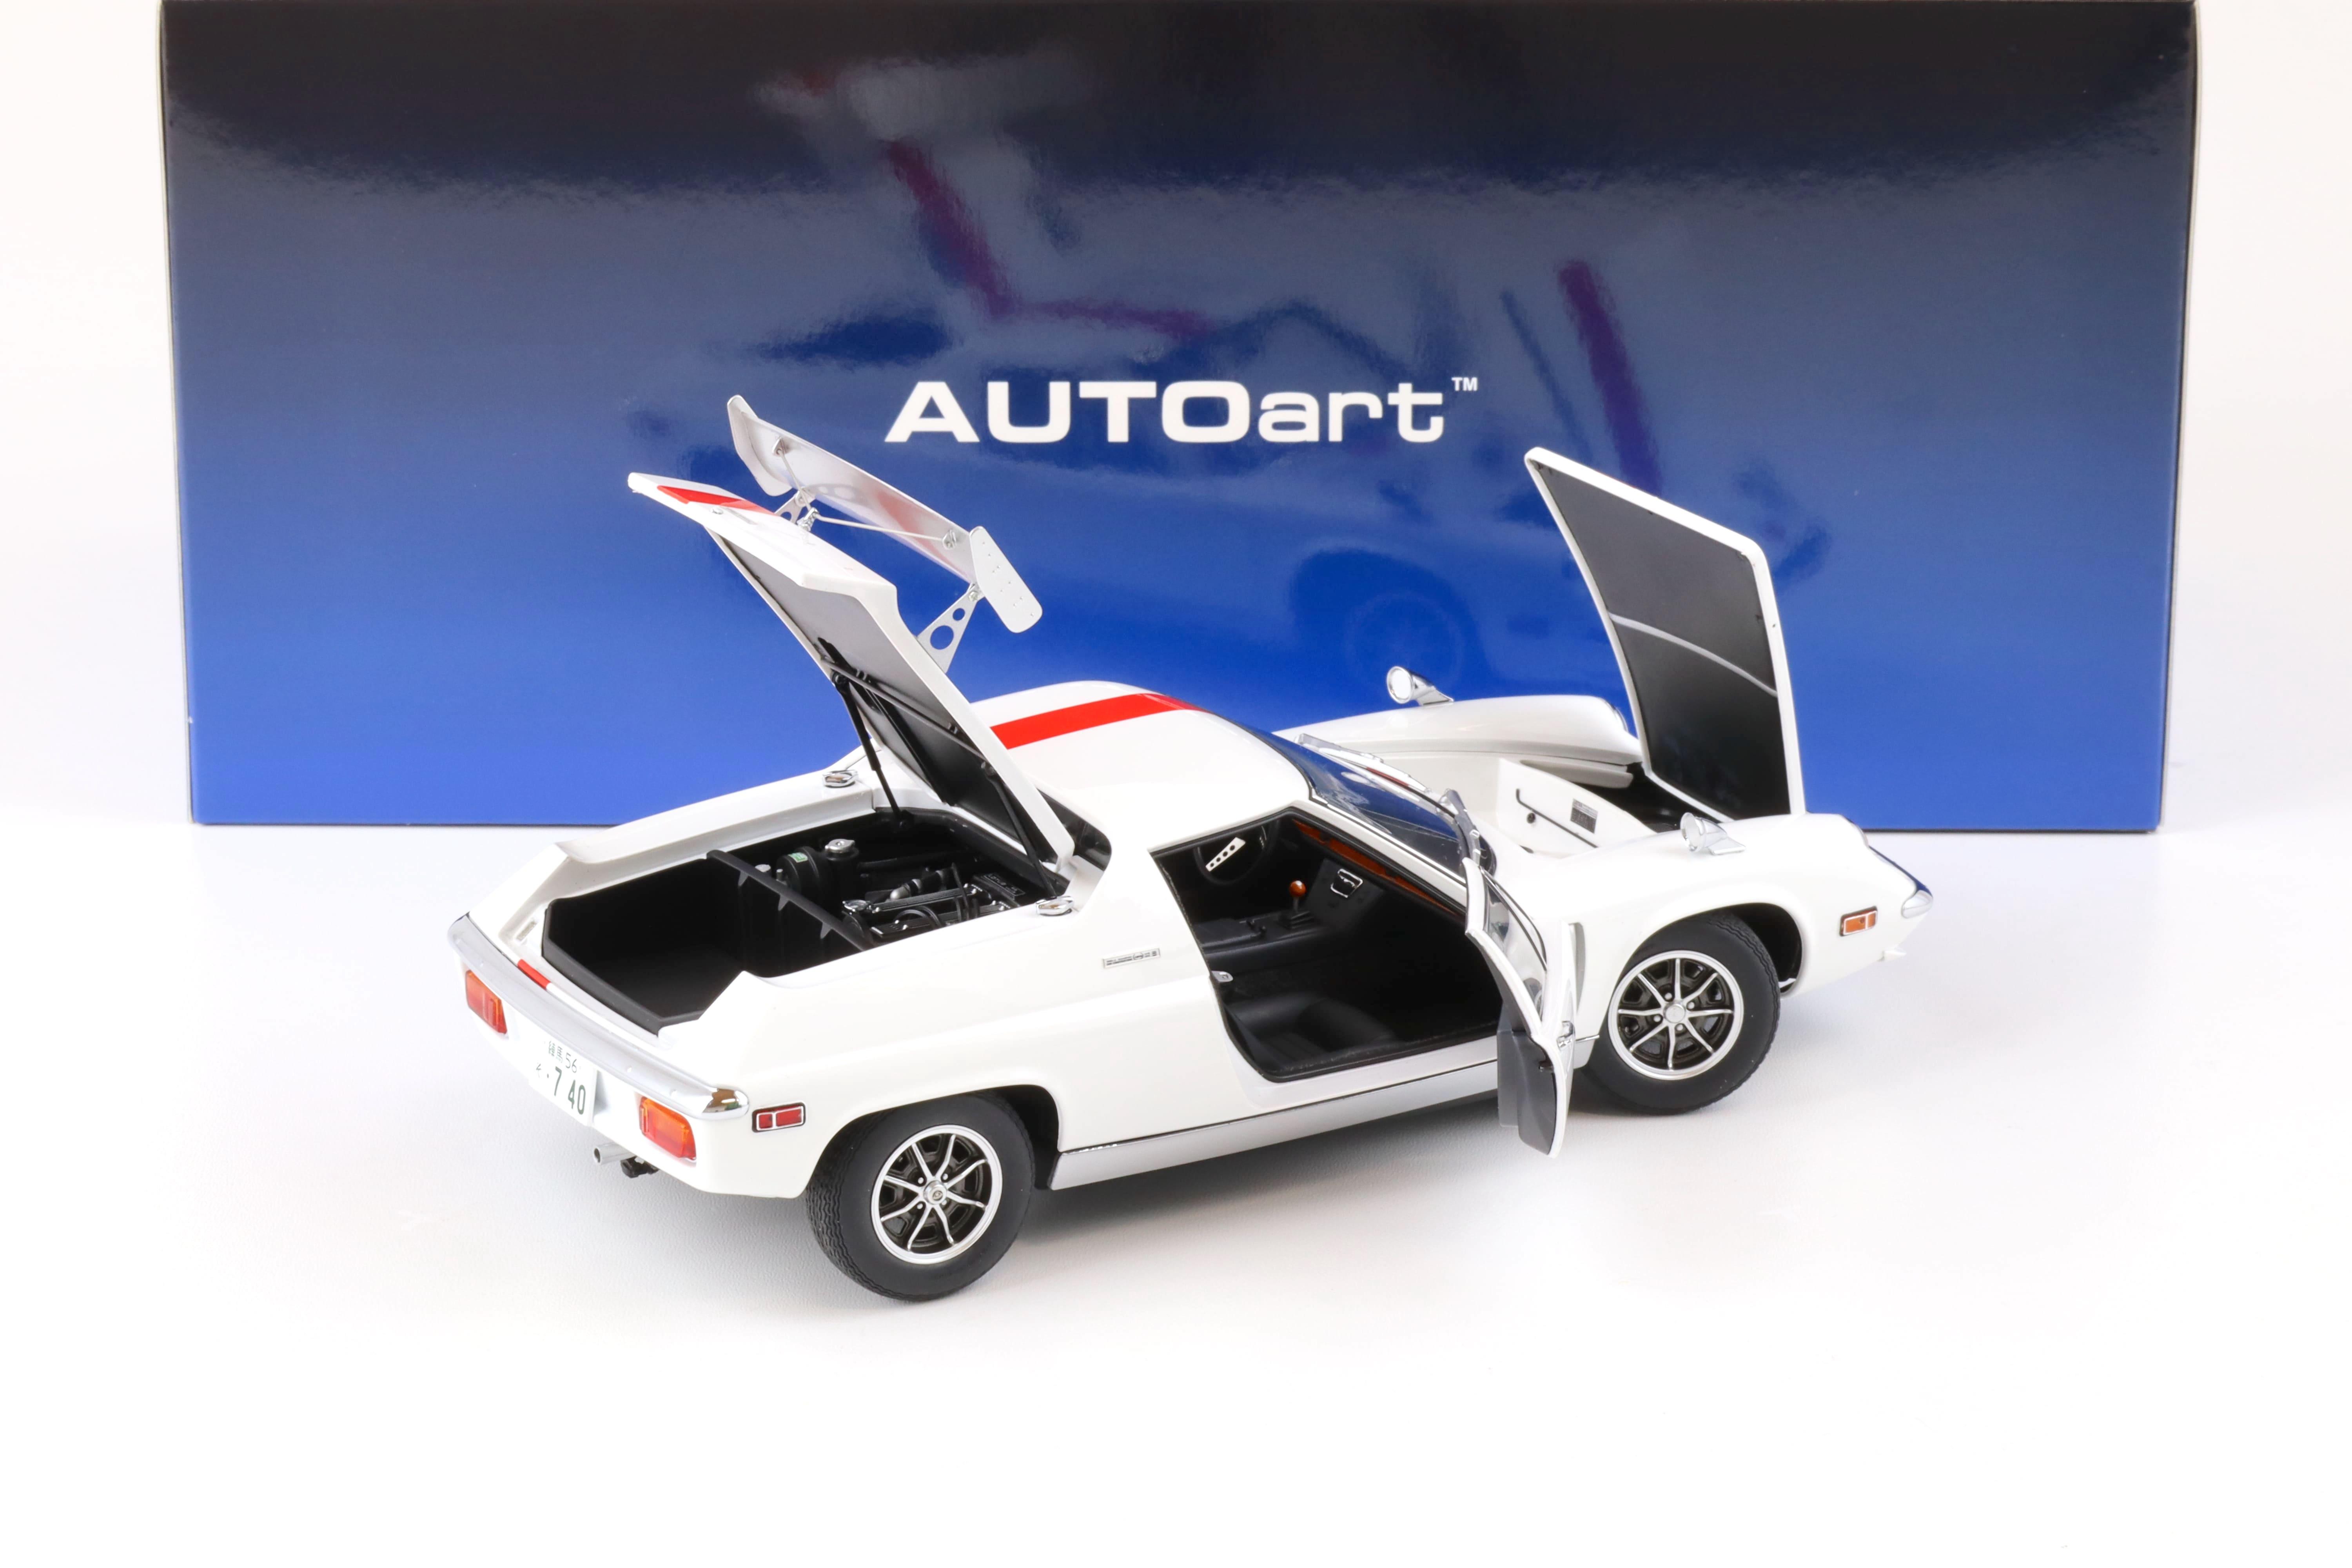 1:18 AUTOart Lotus Europa Special THE CIRCUIT WOLF white/ red 75396